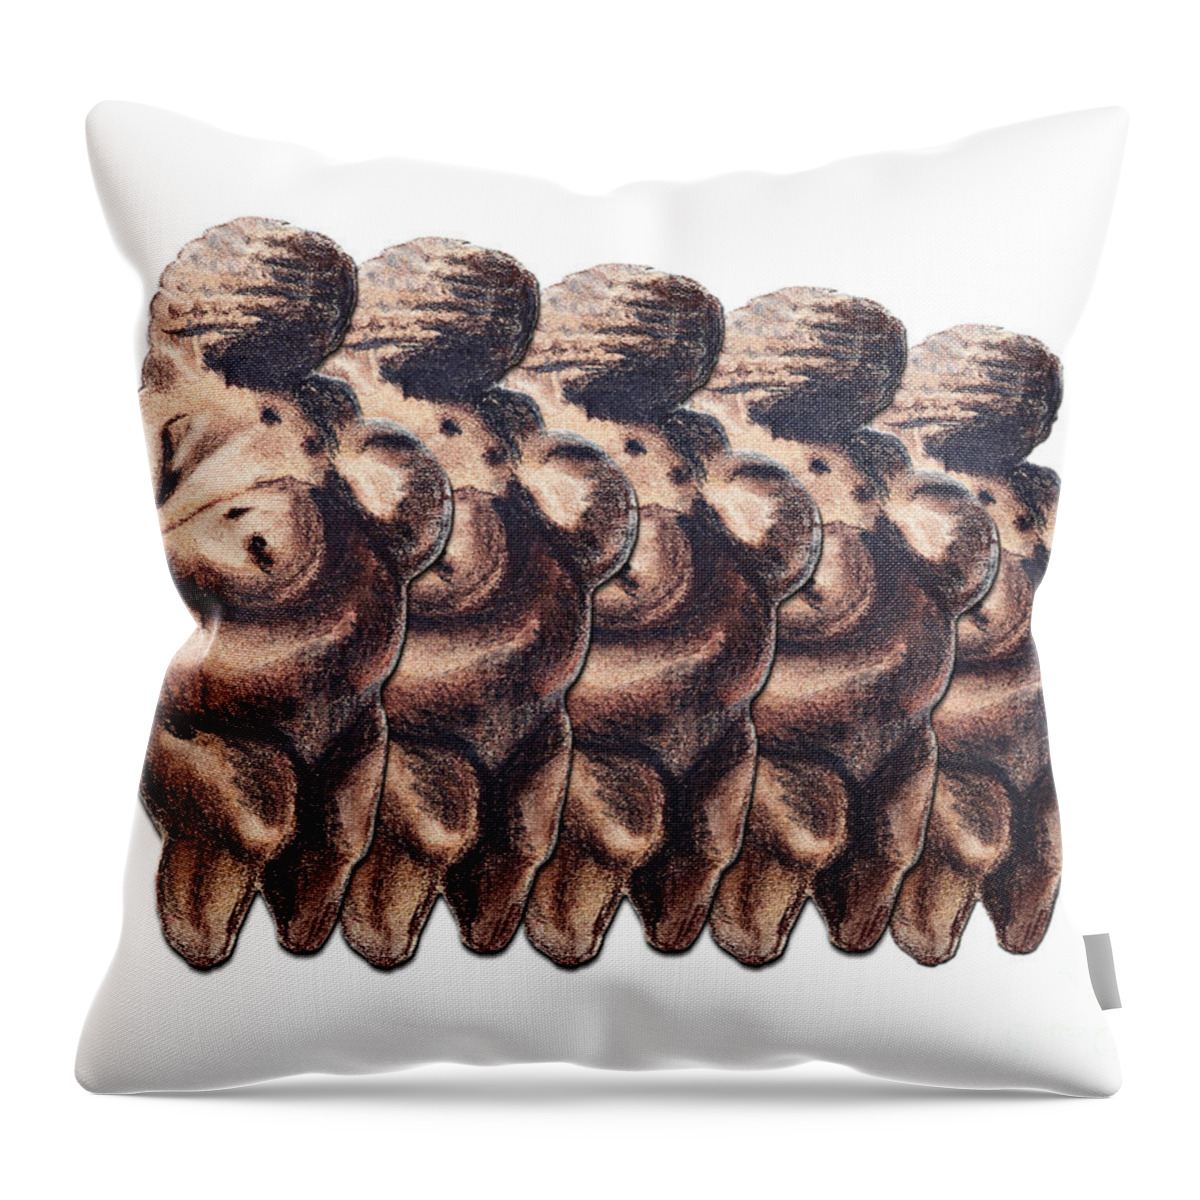 Venus Throw Pillow featuring the drawing Spice Girls by Michal Boubin